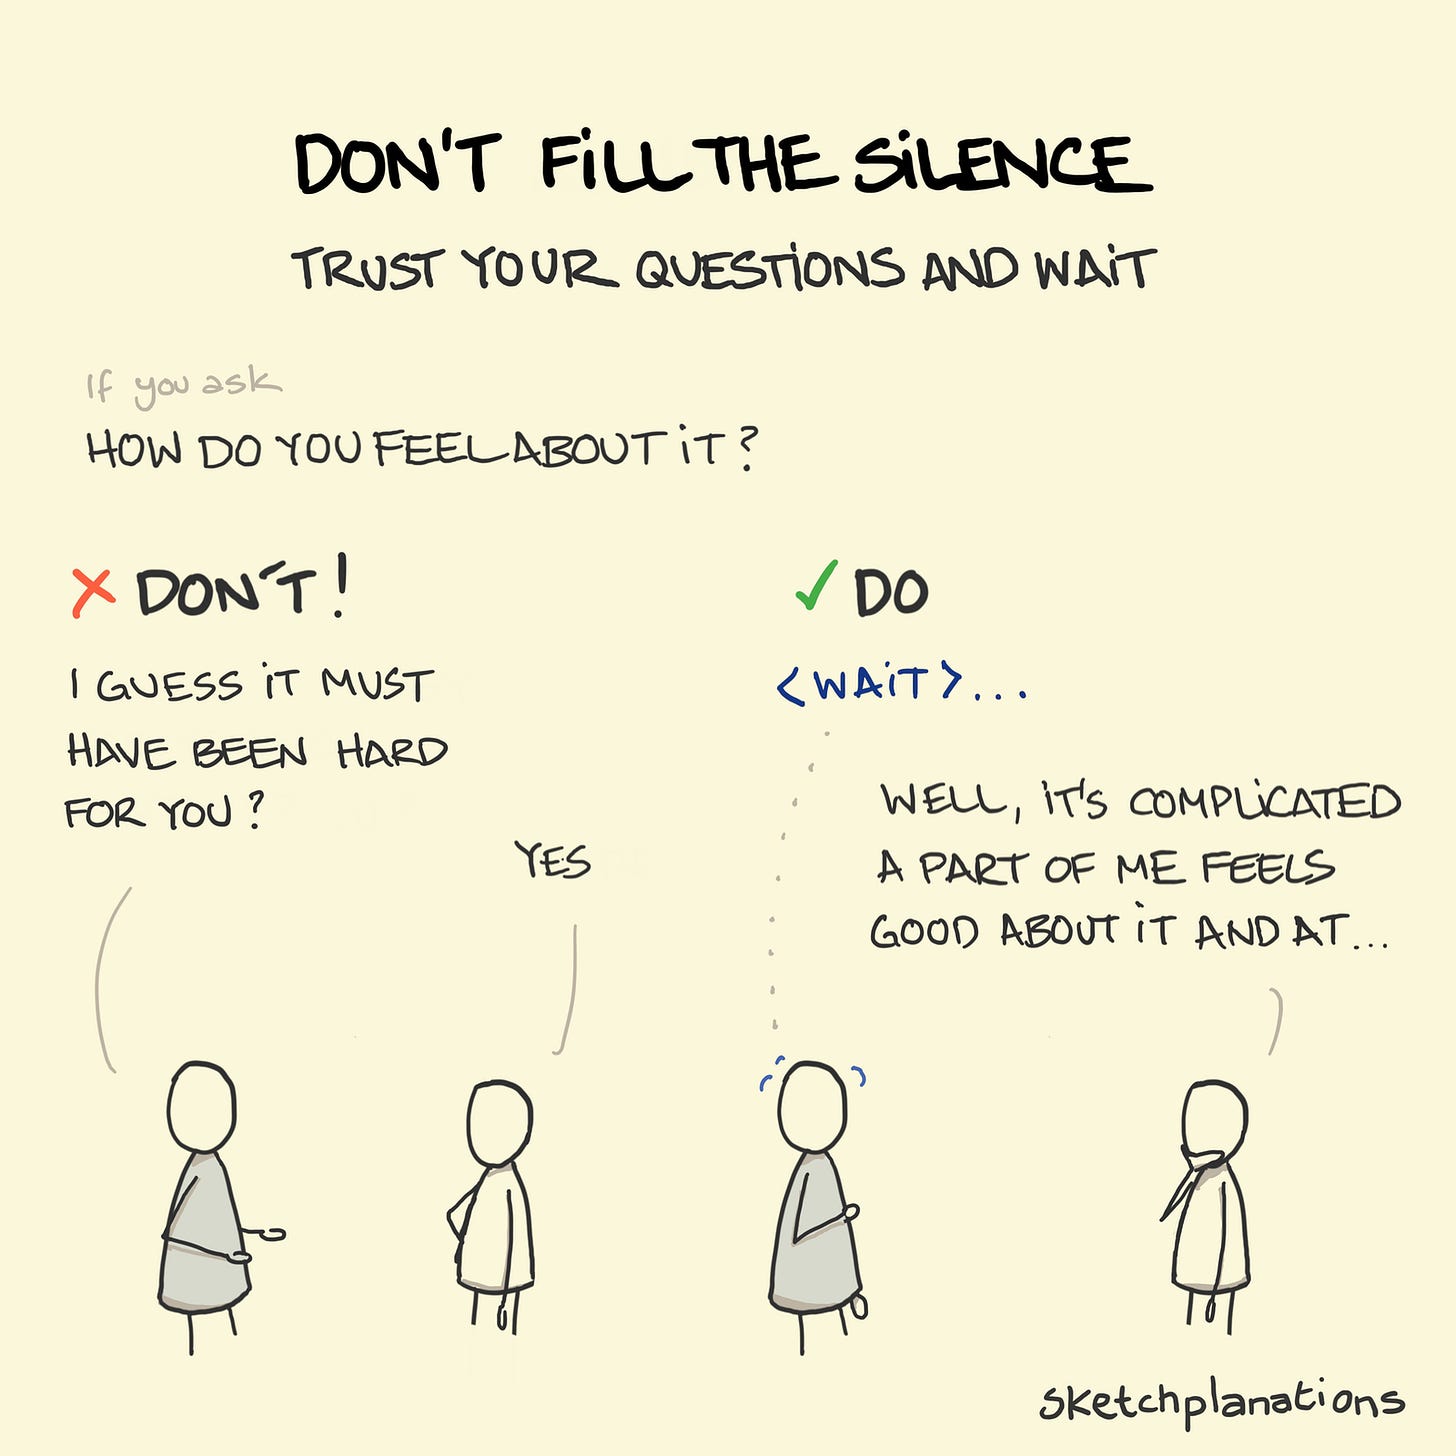 Don't fill the silence - Sketchplanations